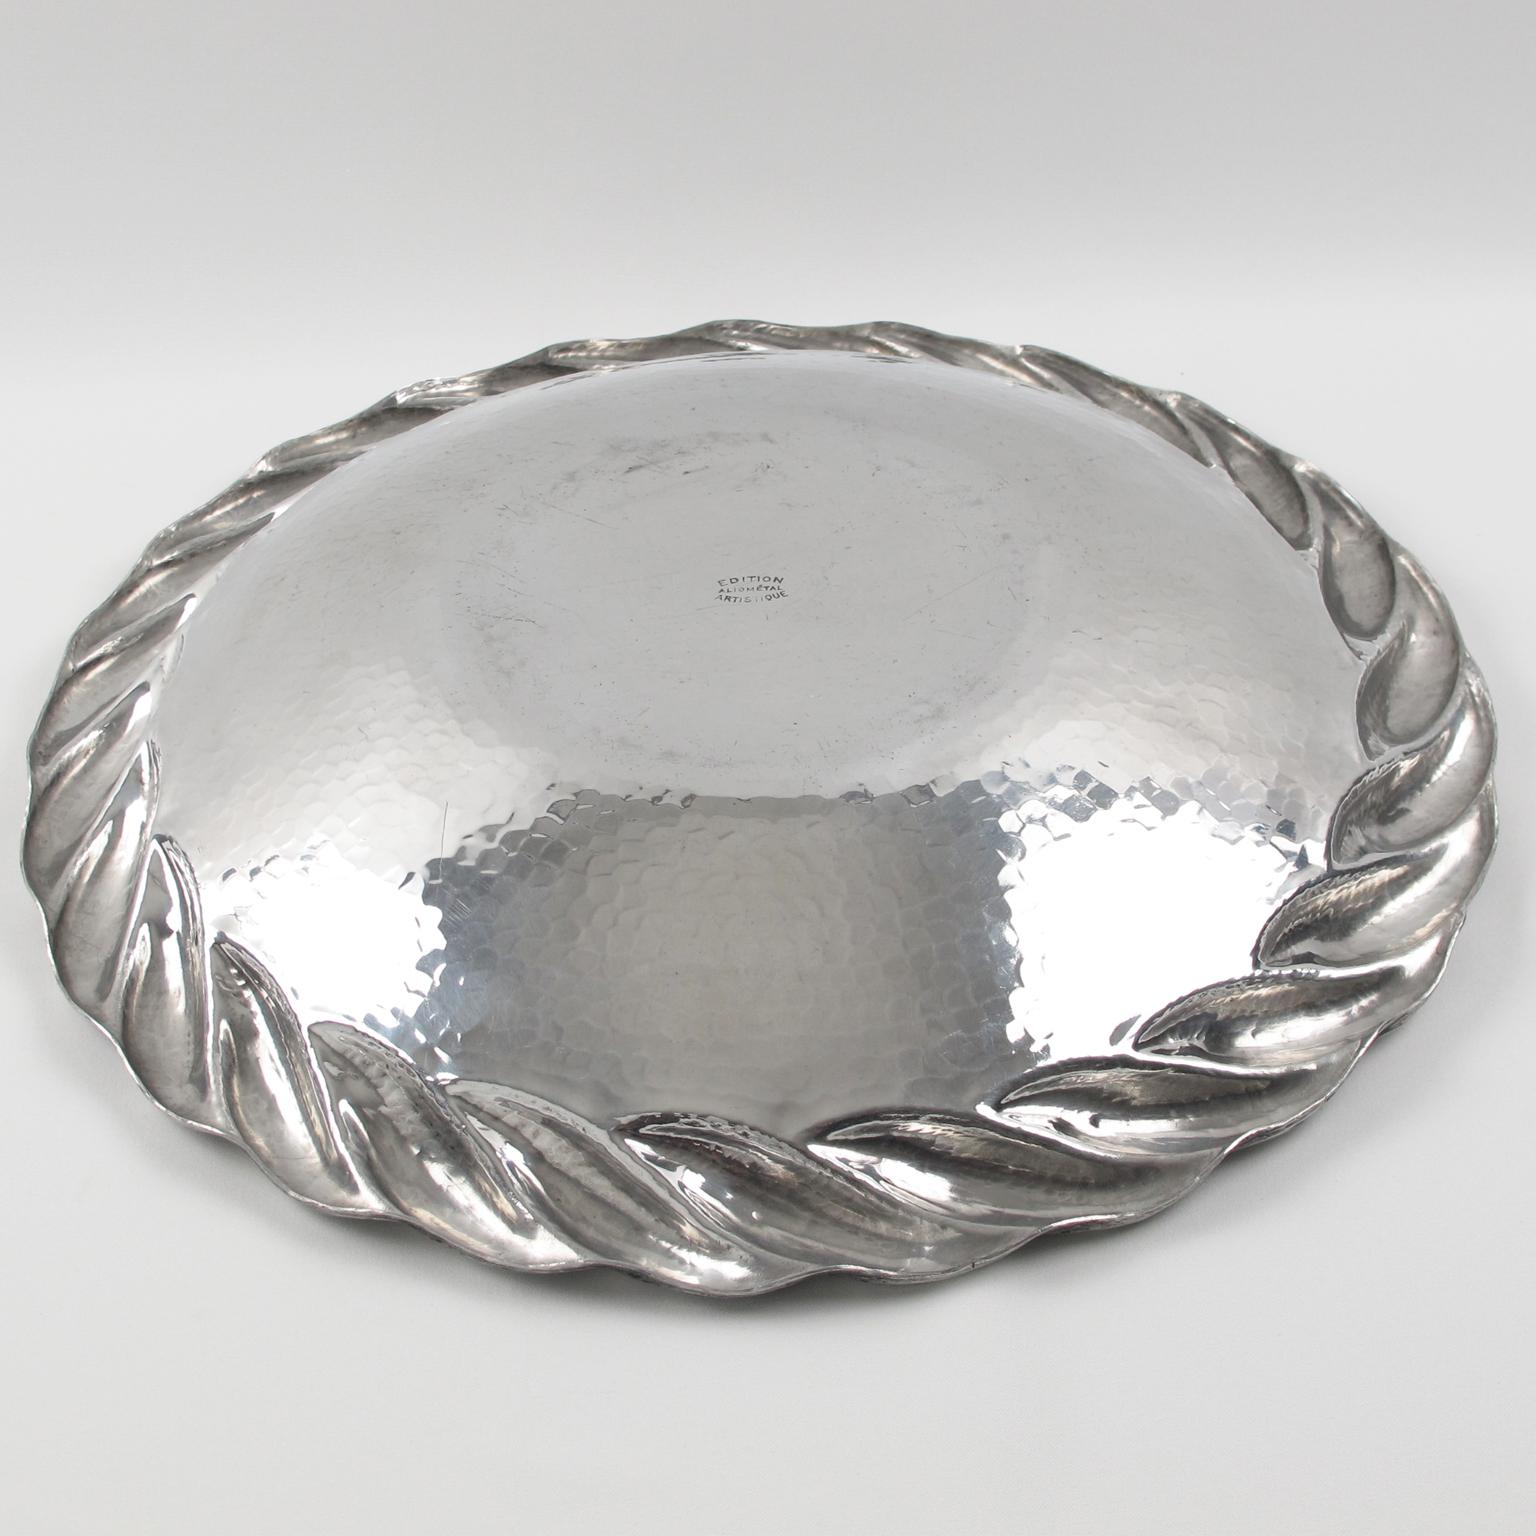 Art Deco Aluminum Platter Centerpiece or Tray by Irman France, 1930s For Sale 3